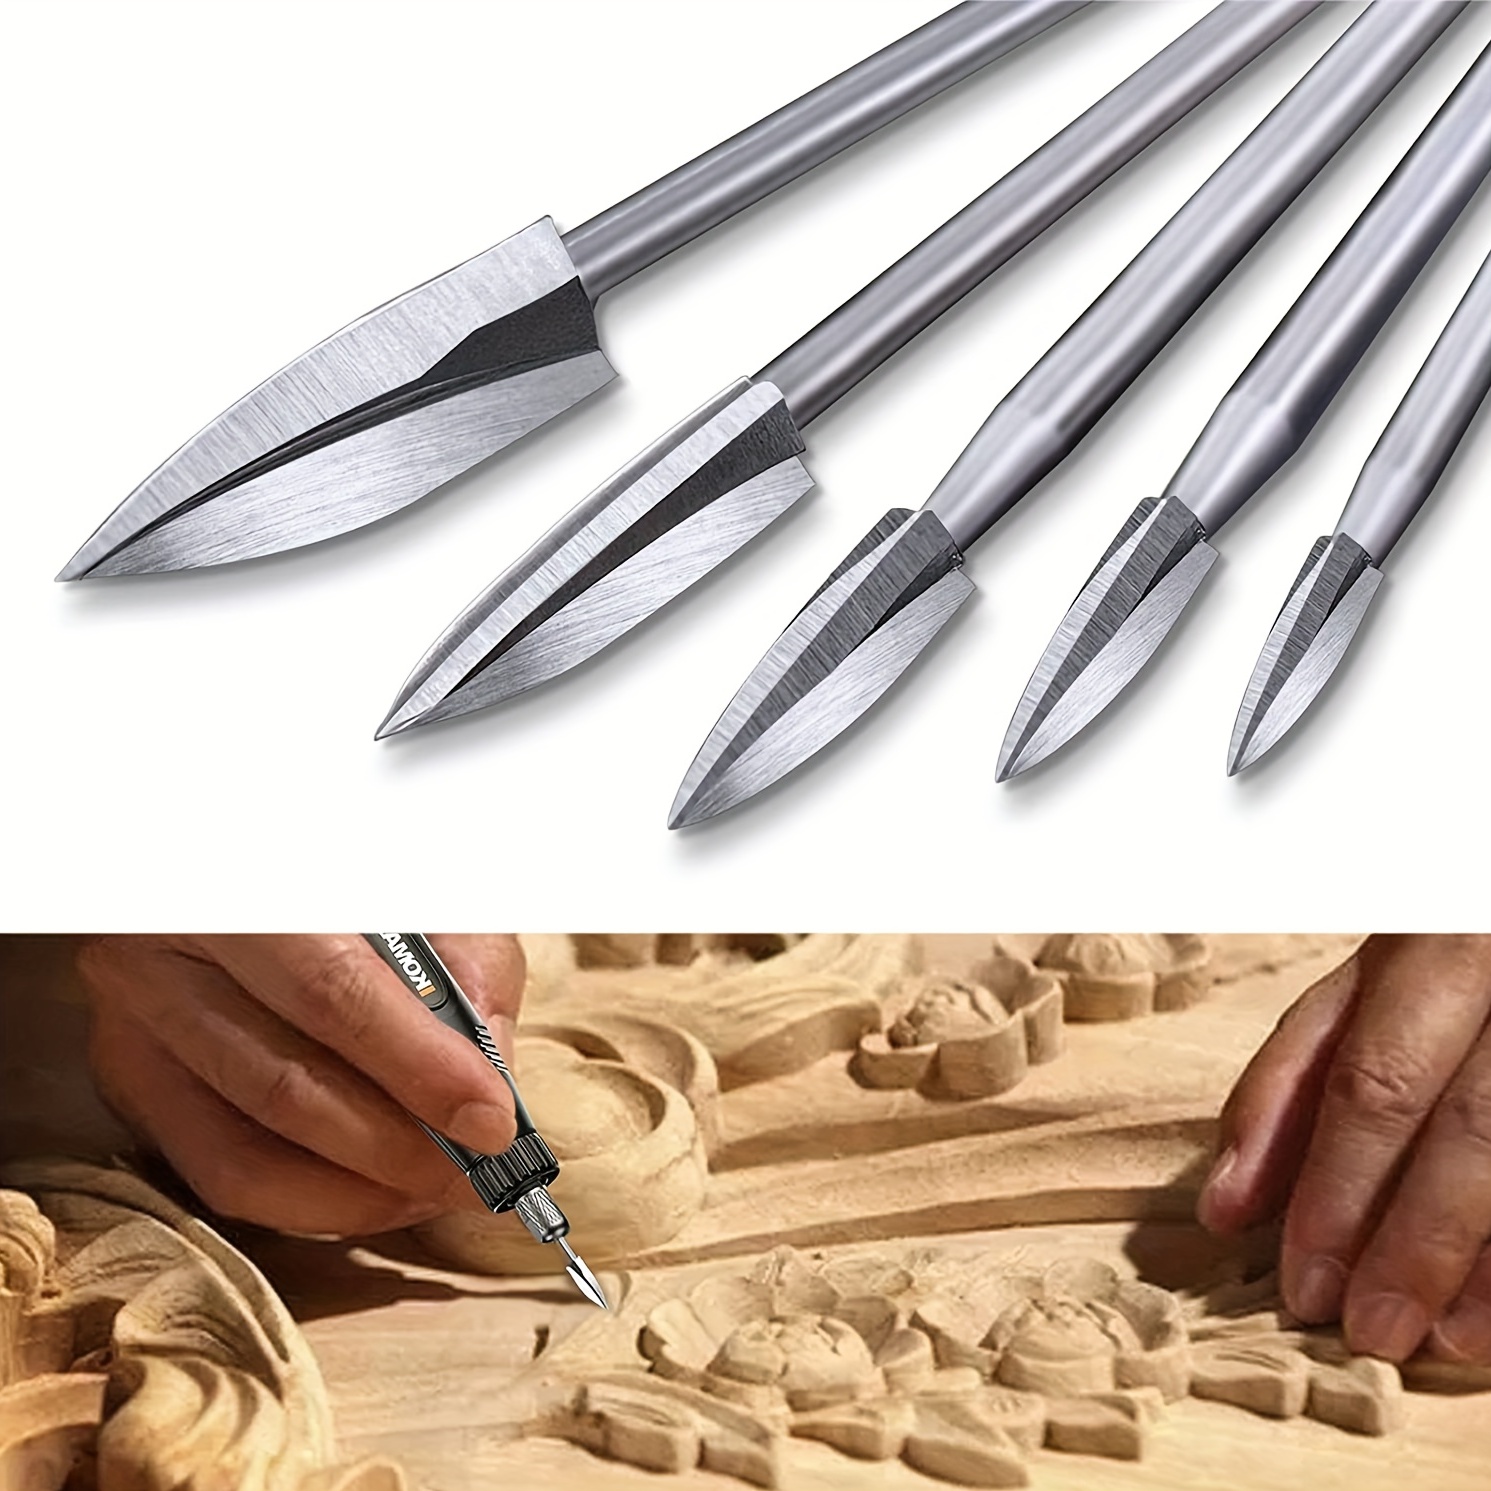 6pcs mini driil woodworking hand tools router bits wood working drill bits  for carving rotary tool kit crafts dremel accessories